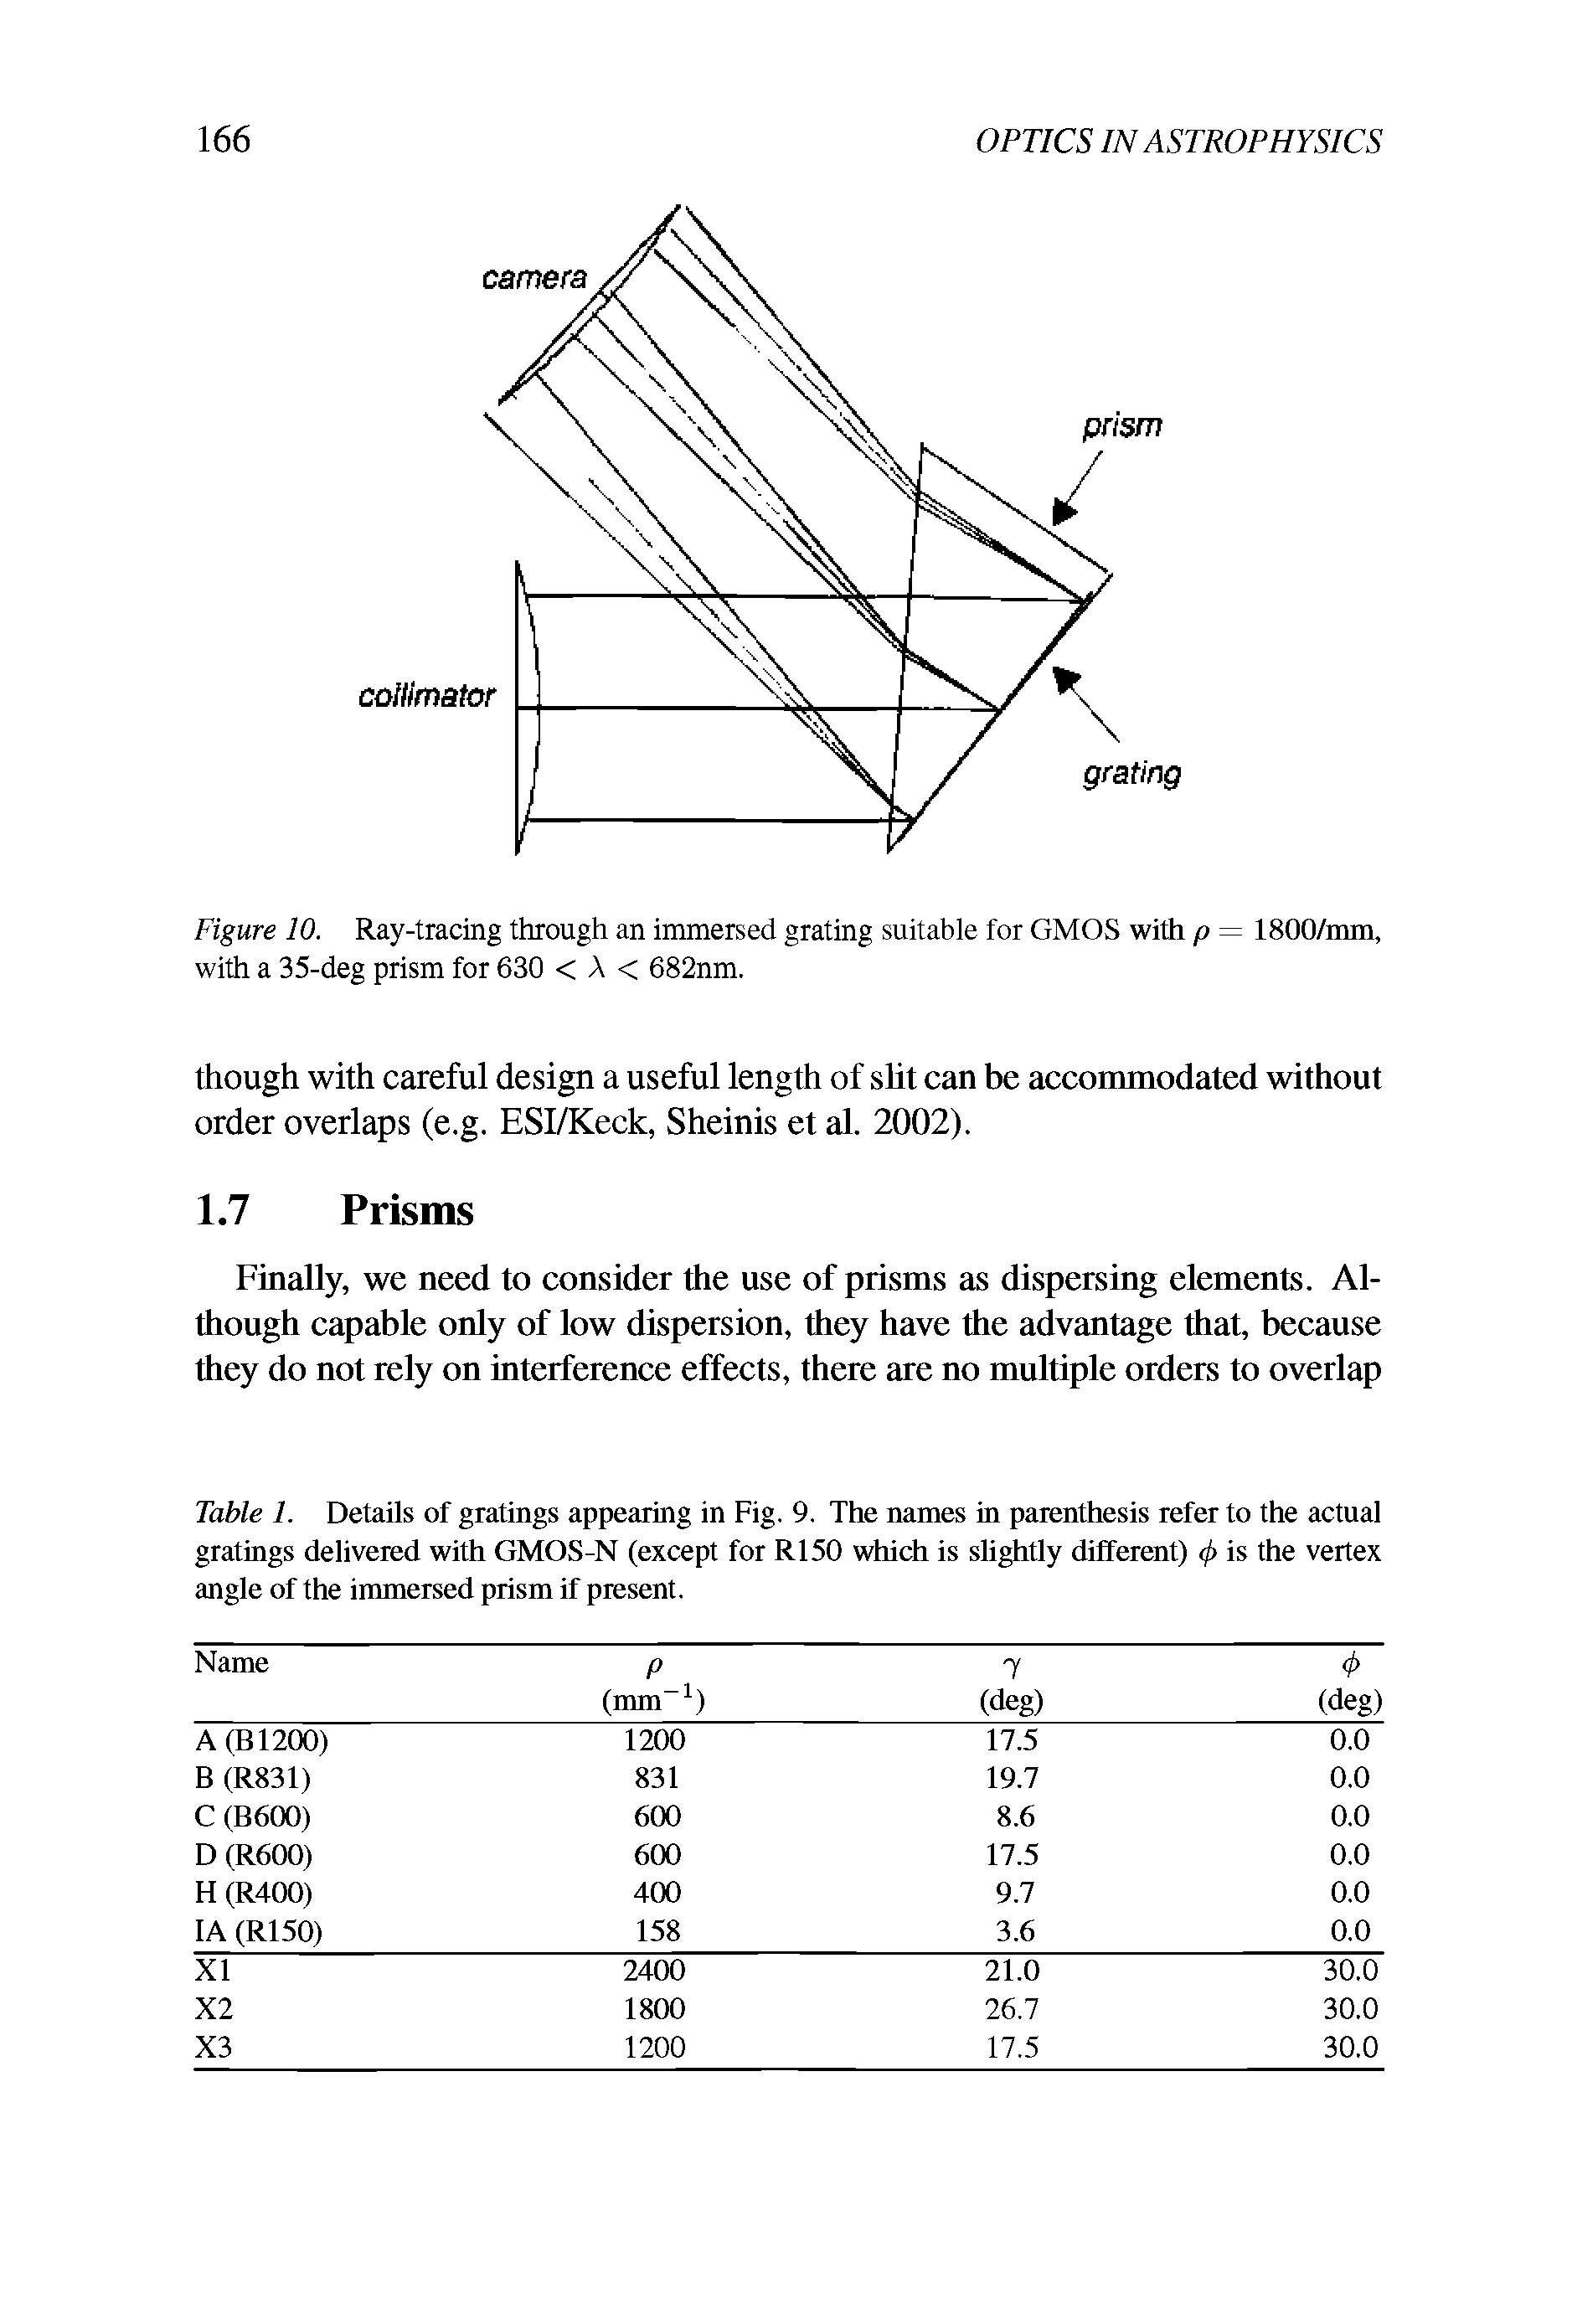 Table 1. Details of gratings appearing in Fig. 9. The names in parenthesis refer to the actual gratings delivered with GMOS-N (except for R150 which is slightly different) <f> is the vertex angle of the immersed prism if present.